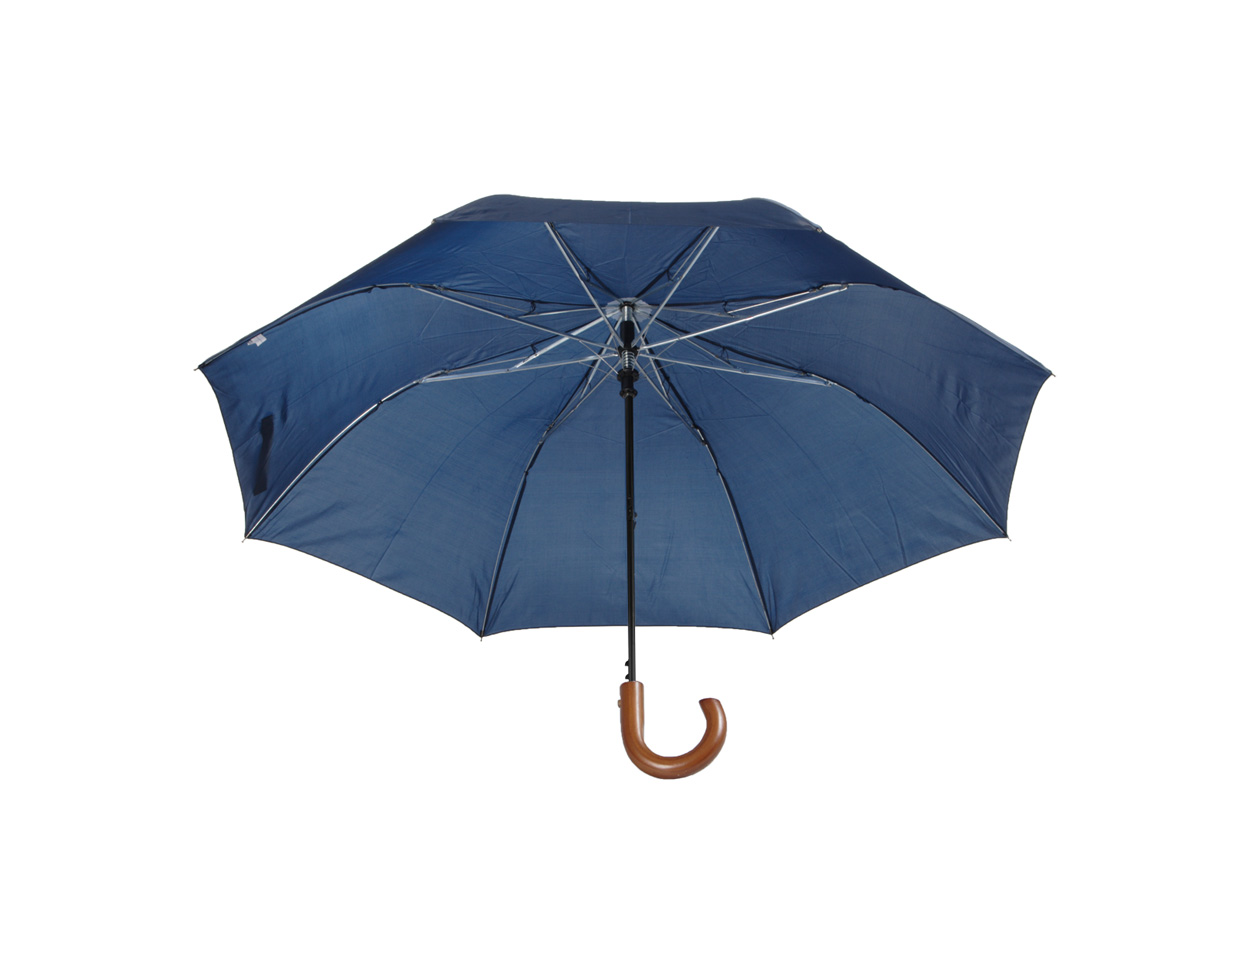 Stansed folding umbrella with wooden handle